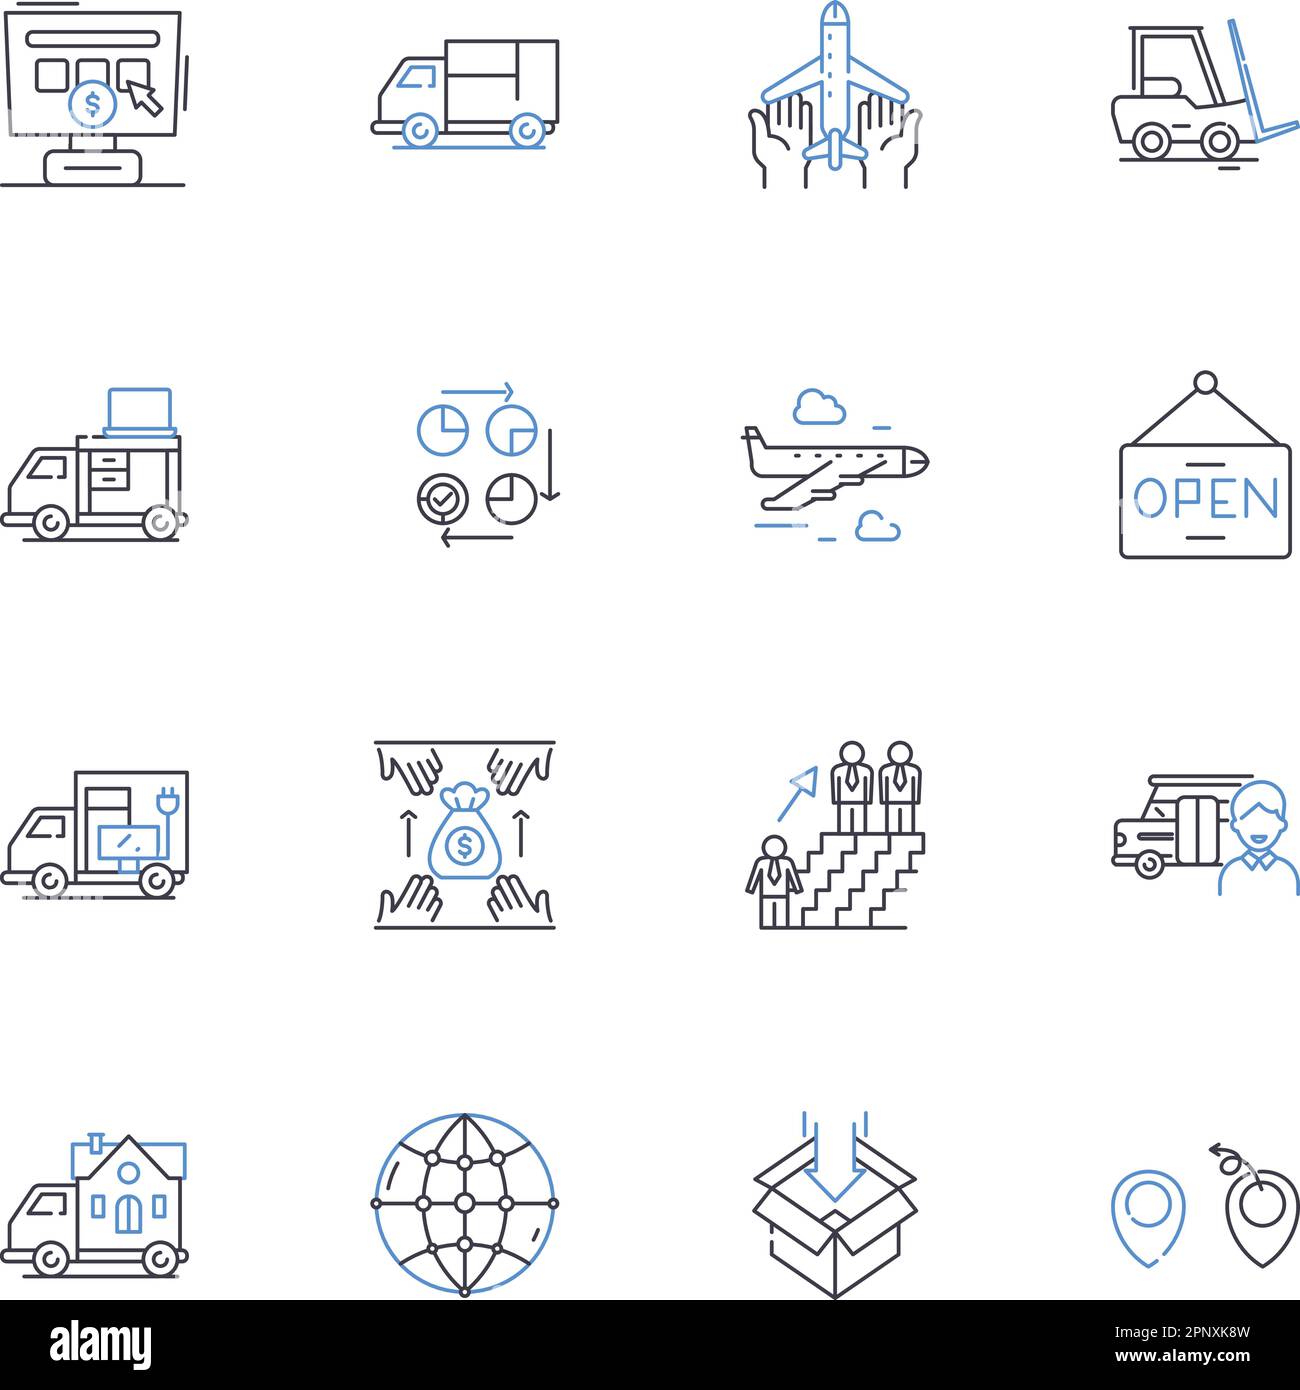 Infrastructure development line icons collection. Roads, Bridges, Highways, Railways, Dams, Airports, Ports vector and linear illustration Stock Vector